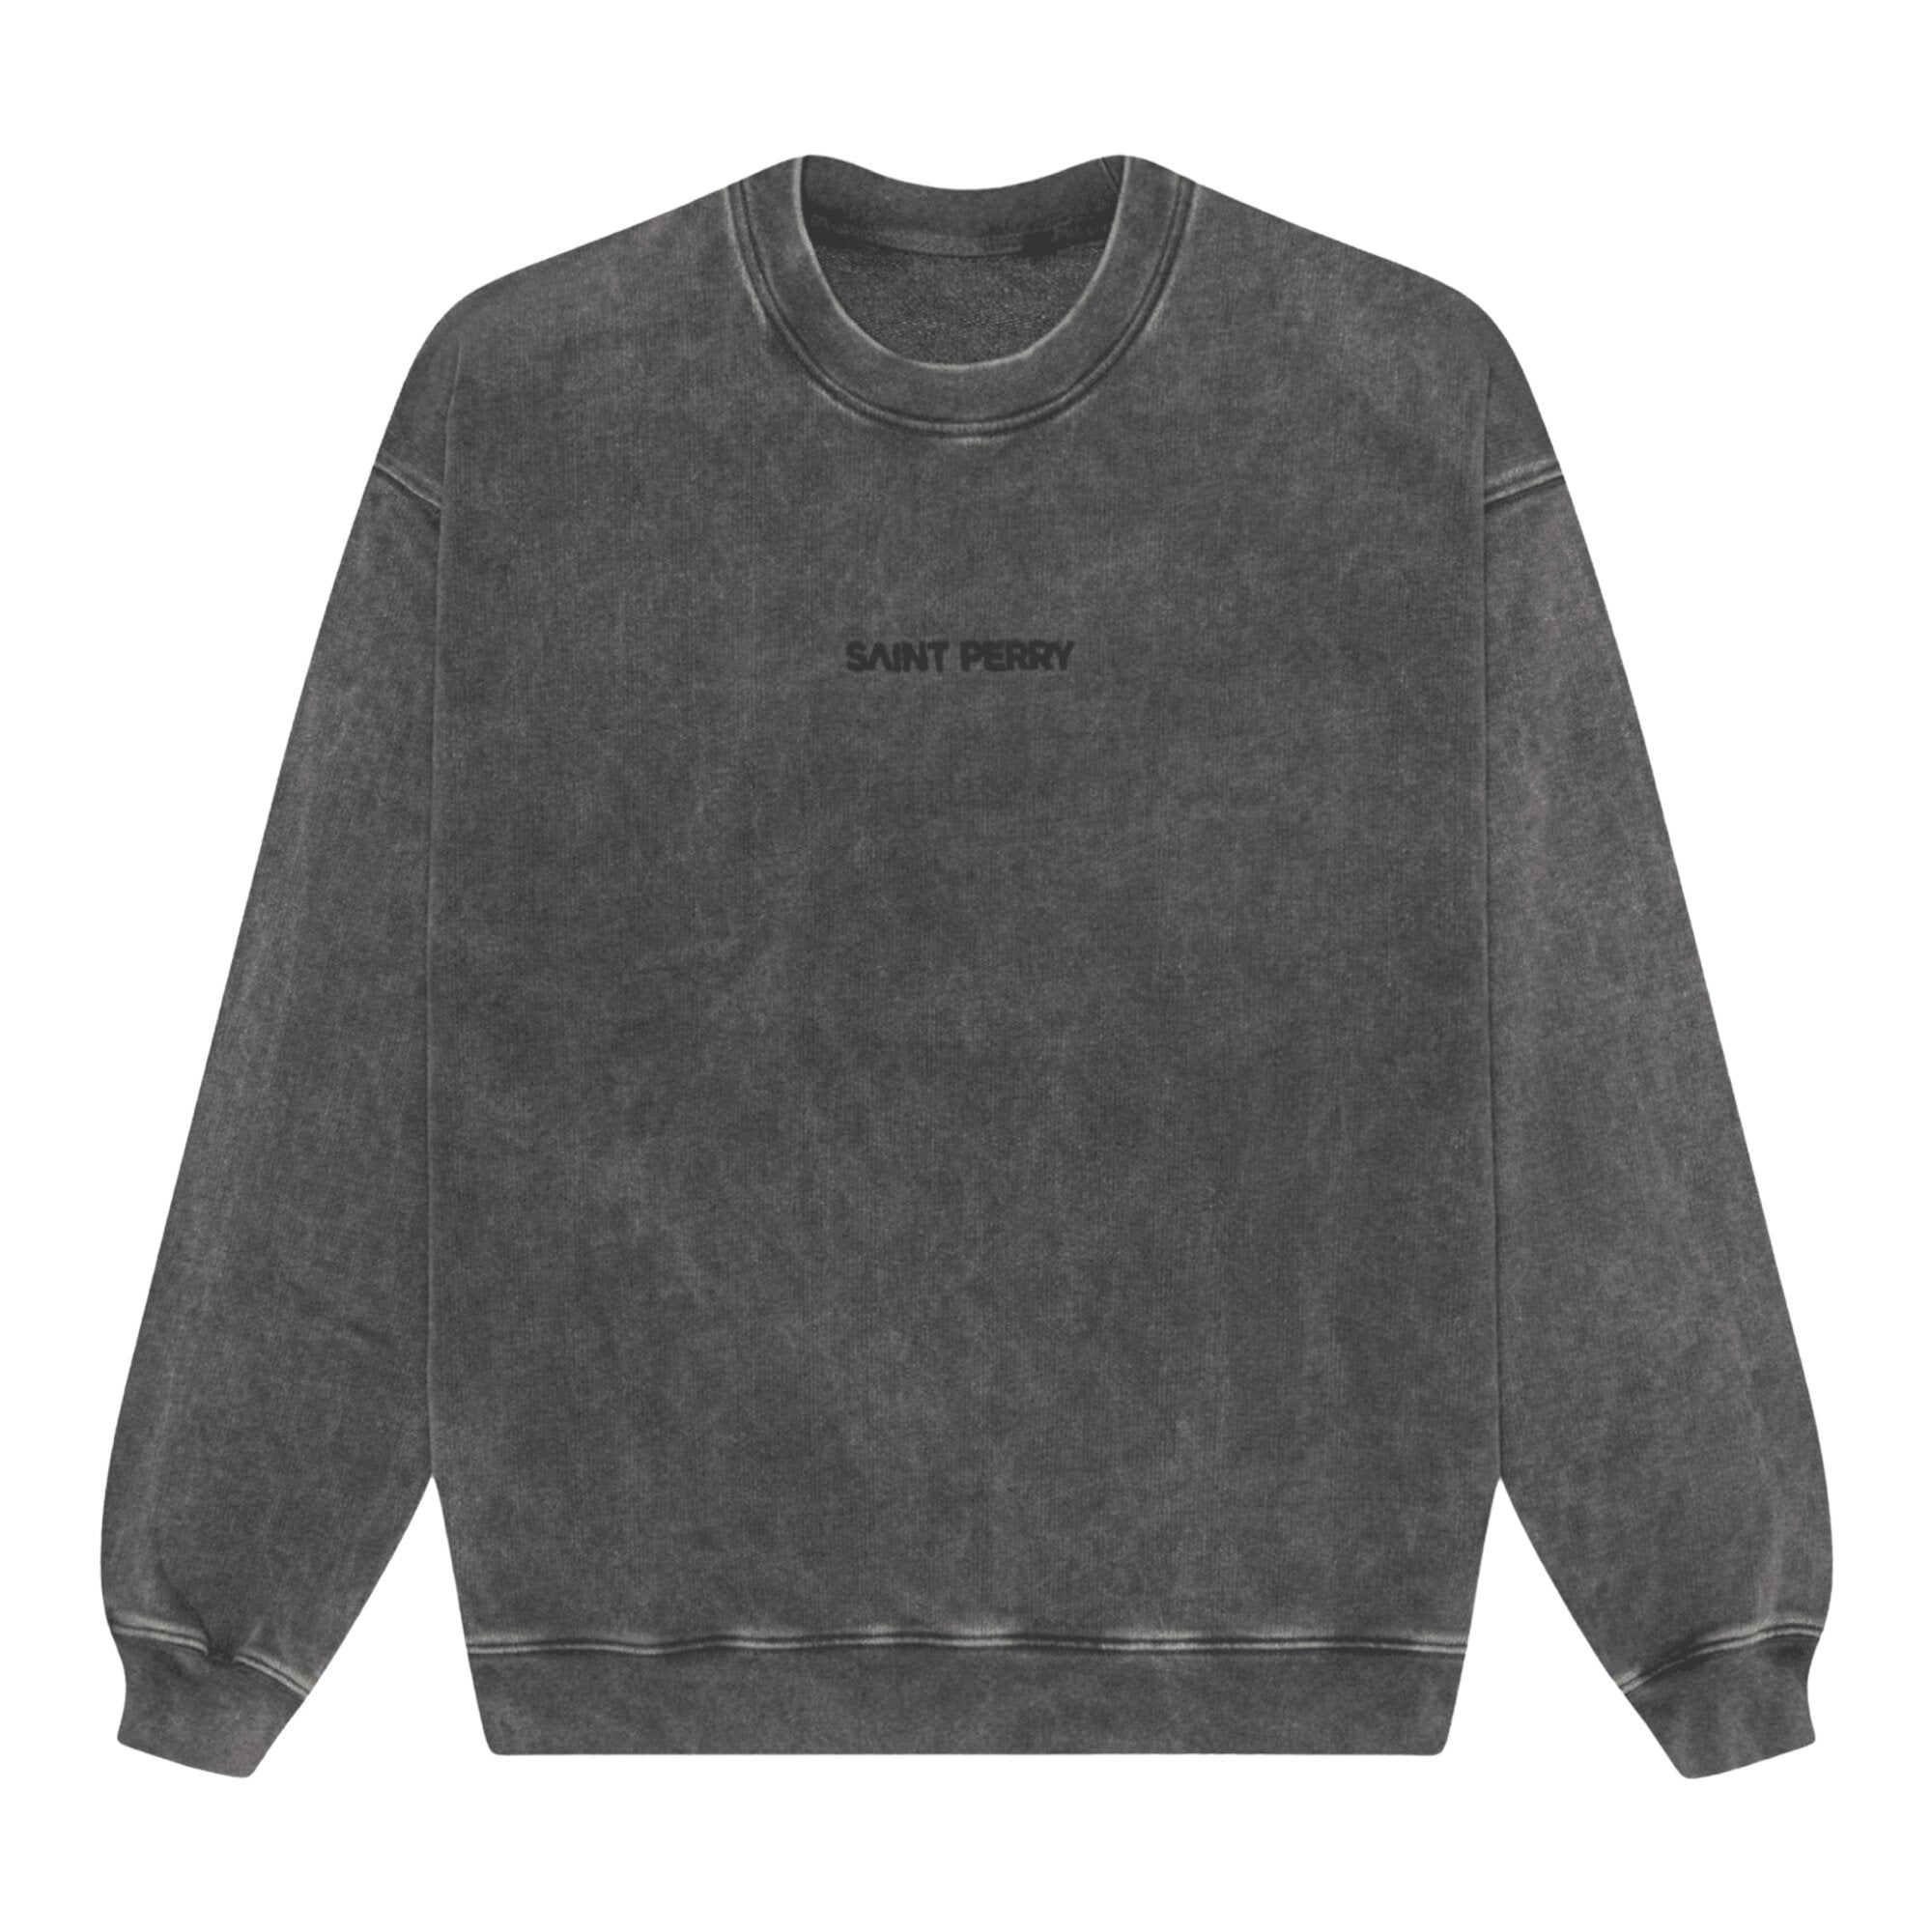 Oversized Vintage Gray Sweater - SAINT PERRY